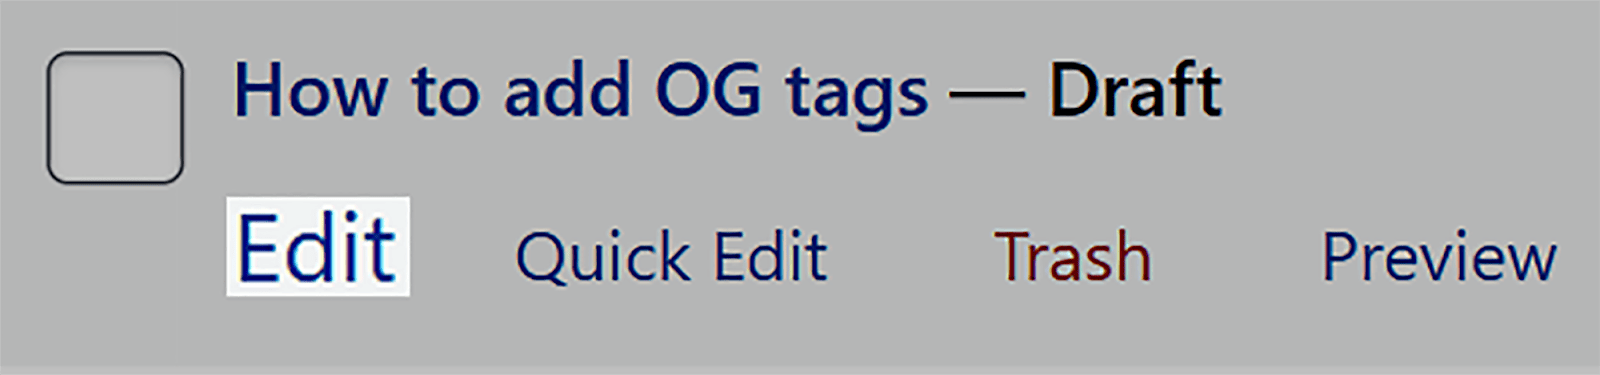 Select Edit under the post you need to add OG tags